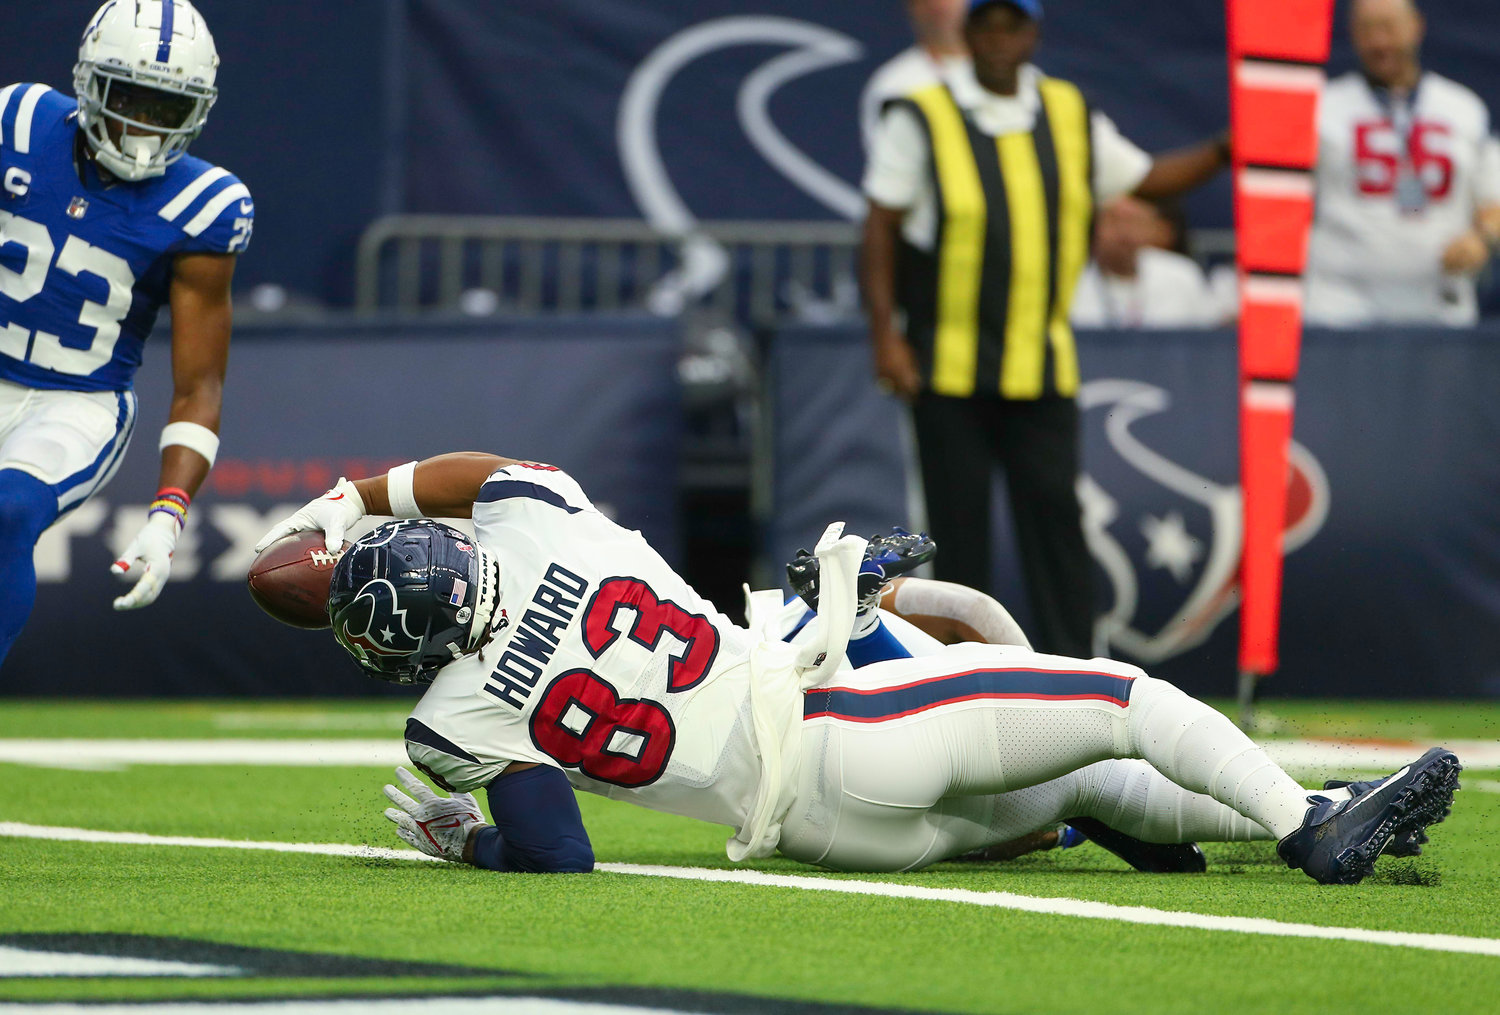 Houston Texans tight end O.J. Howard (83) leans across the goal line for a touchdown on a 16-yard touchdown reception during an NFL game between the Texans and the Colts on September 11, 2022 in Houston. The game ended in a 20-20 tie after a scoreless overtime period.